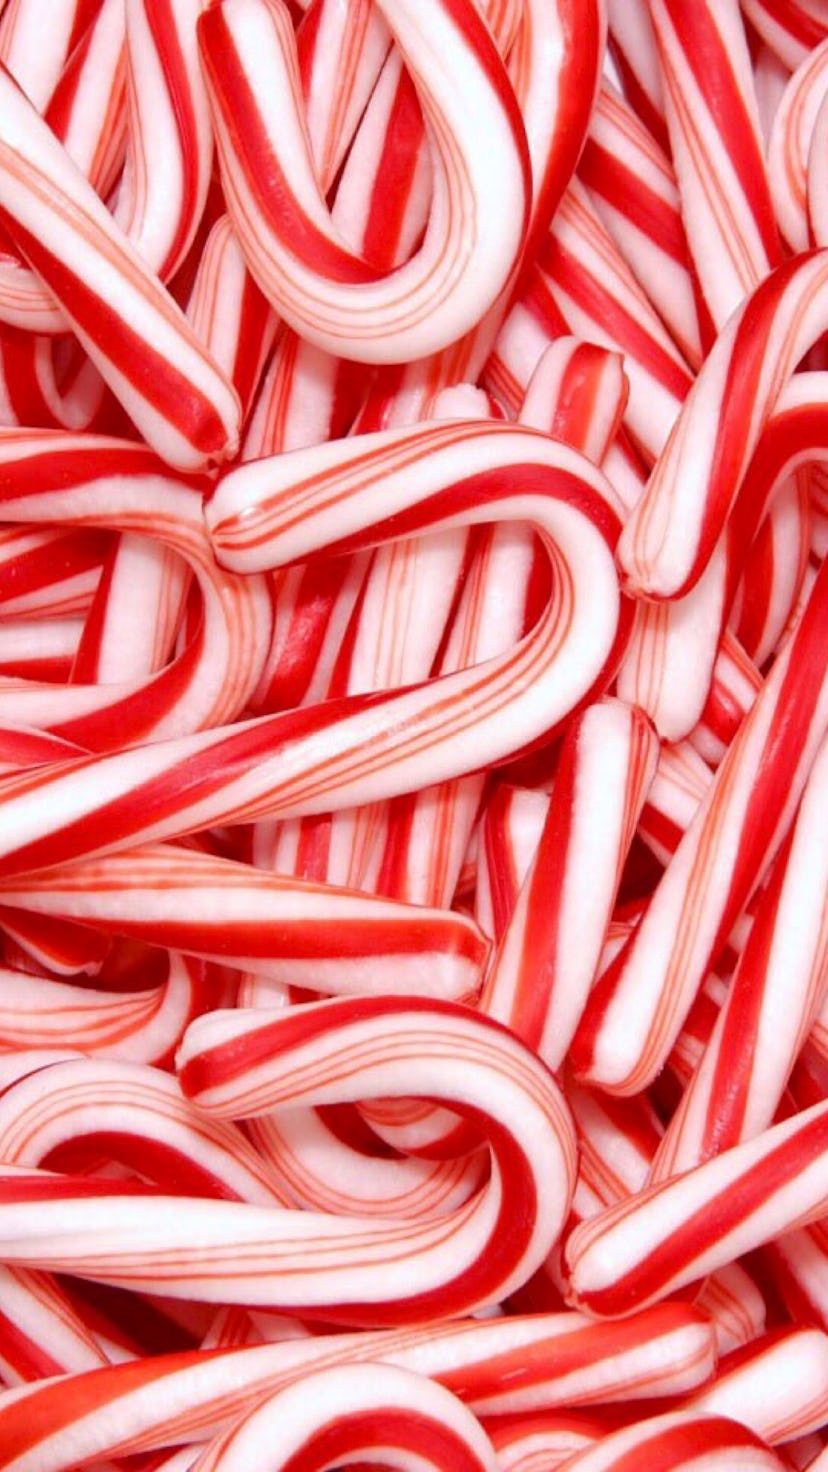 Candy cane crafts